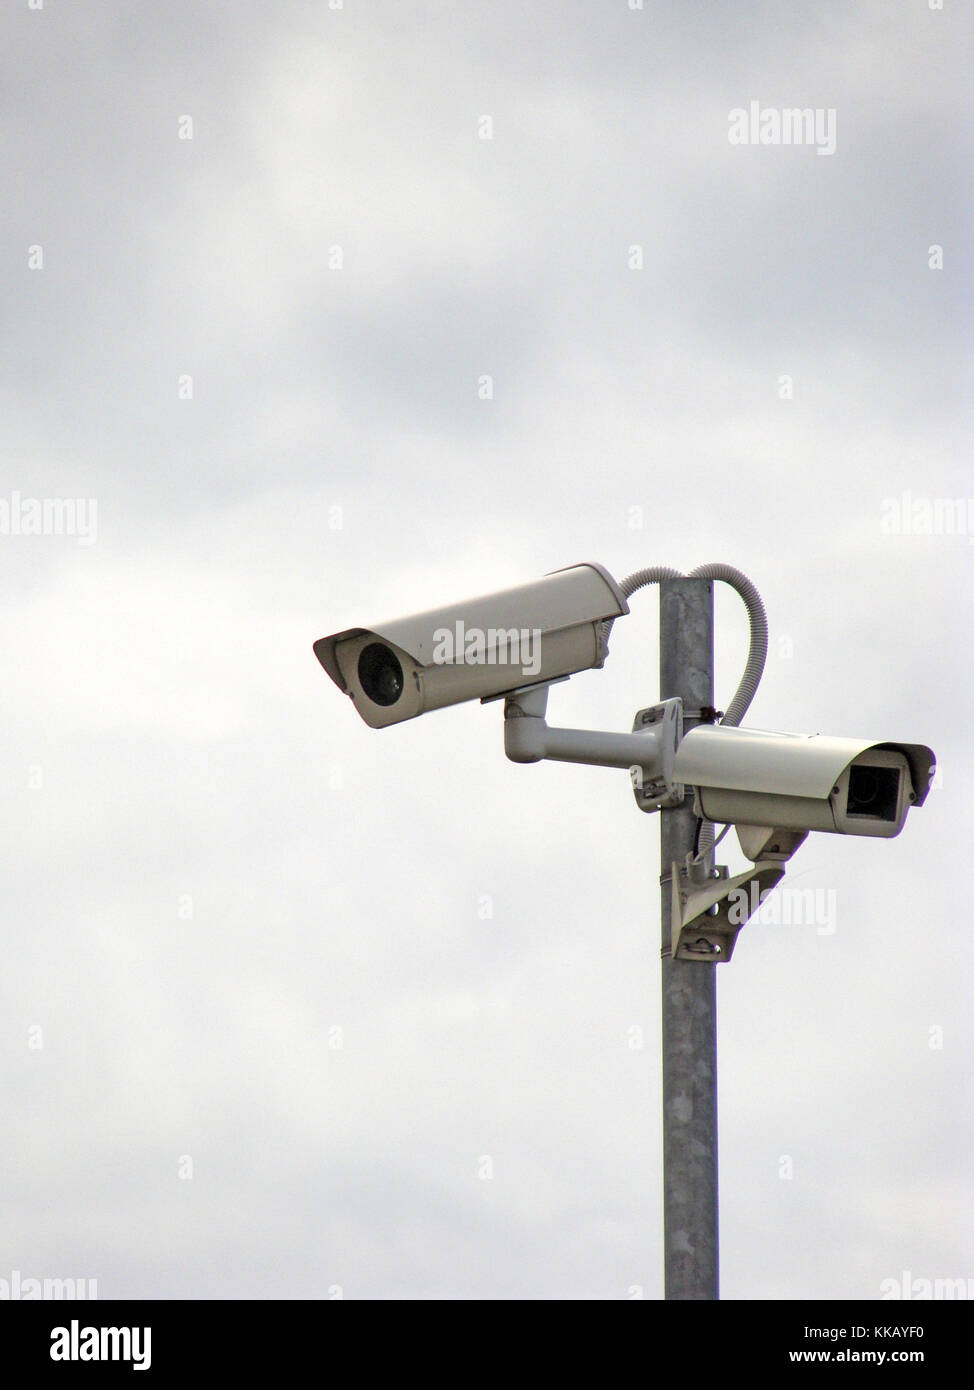 Two security monitoring video cameras on metal pole Stock Photo